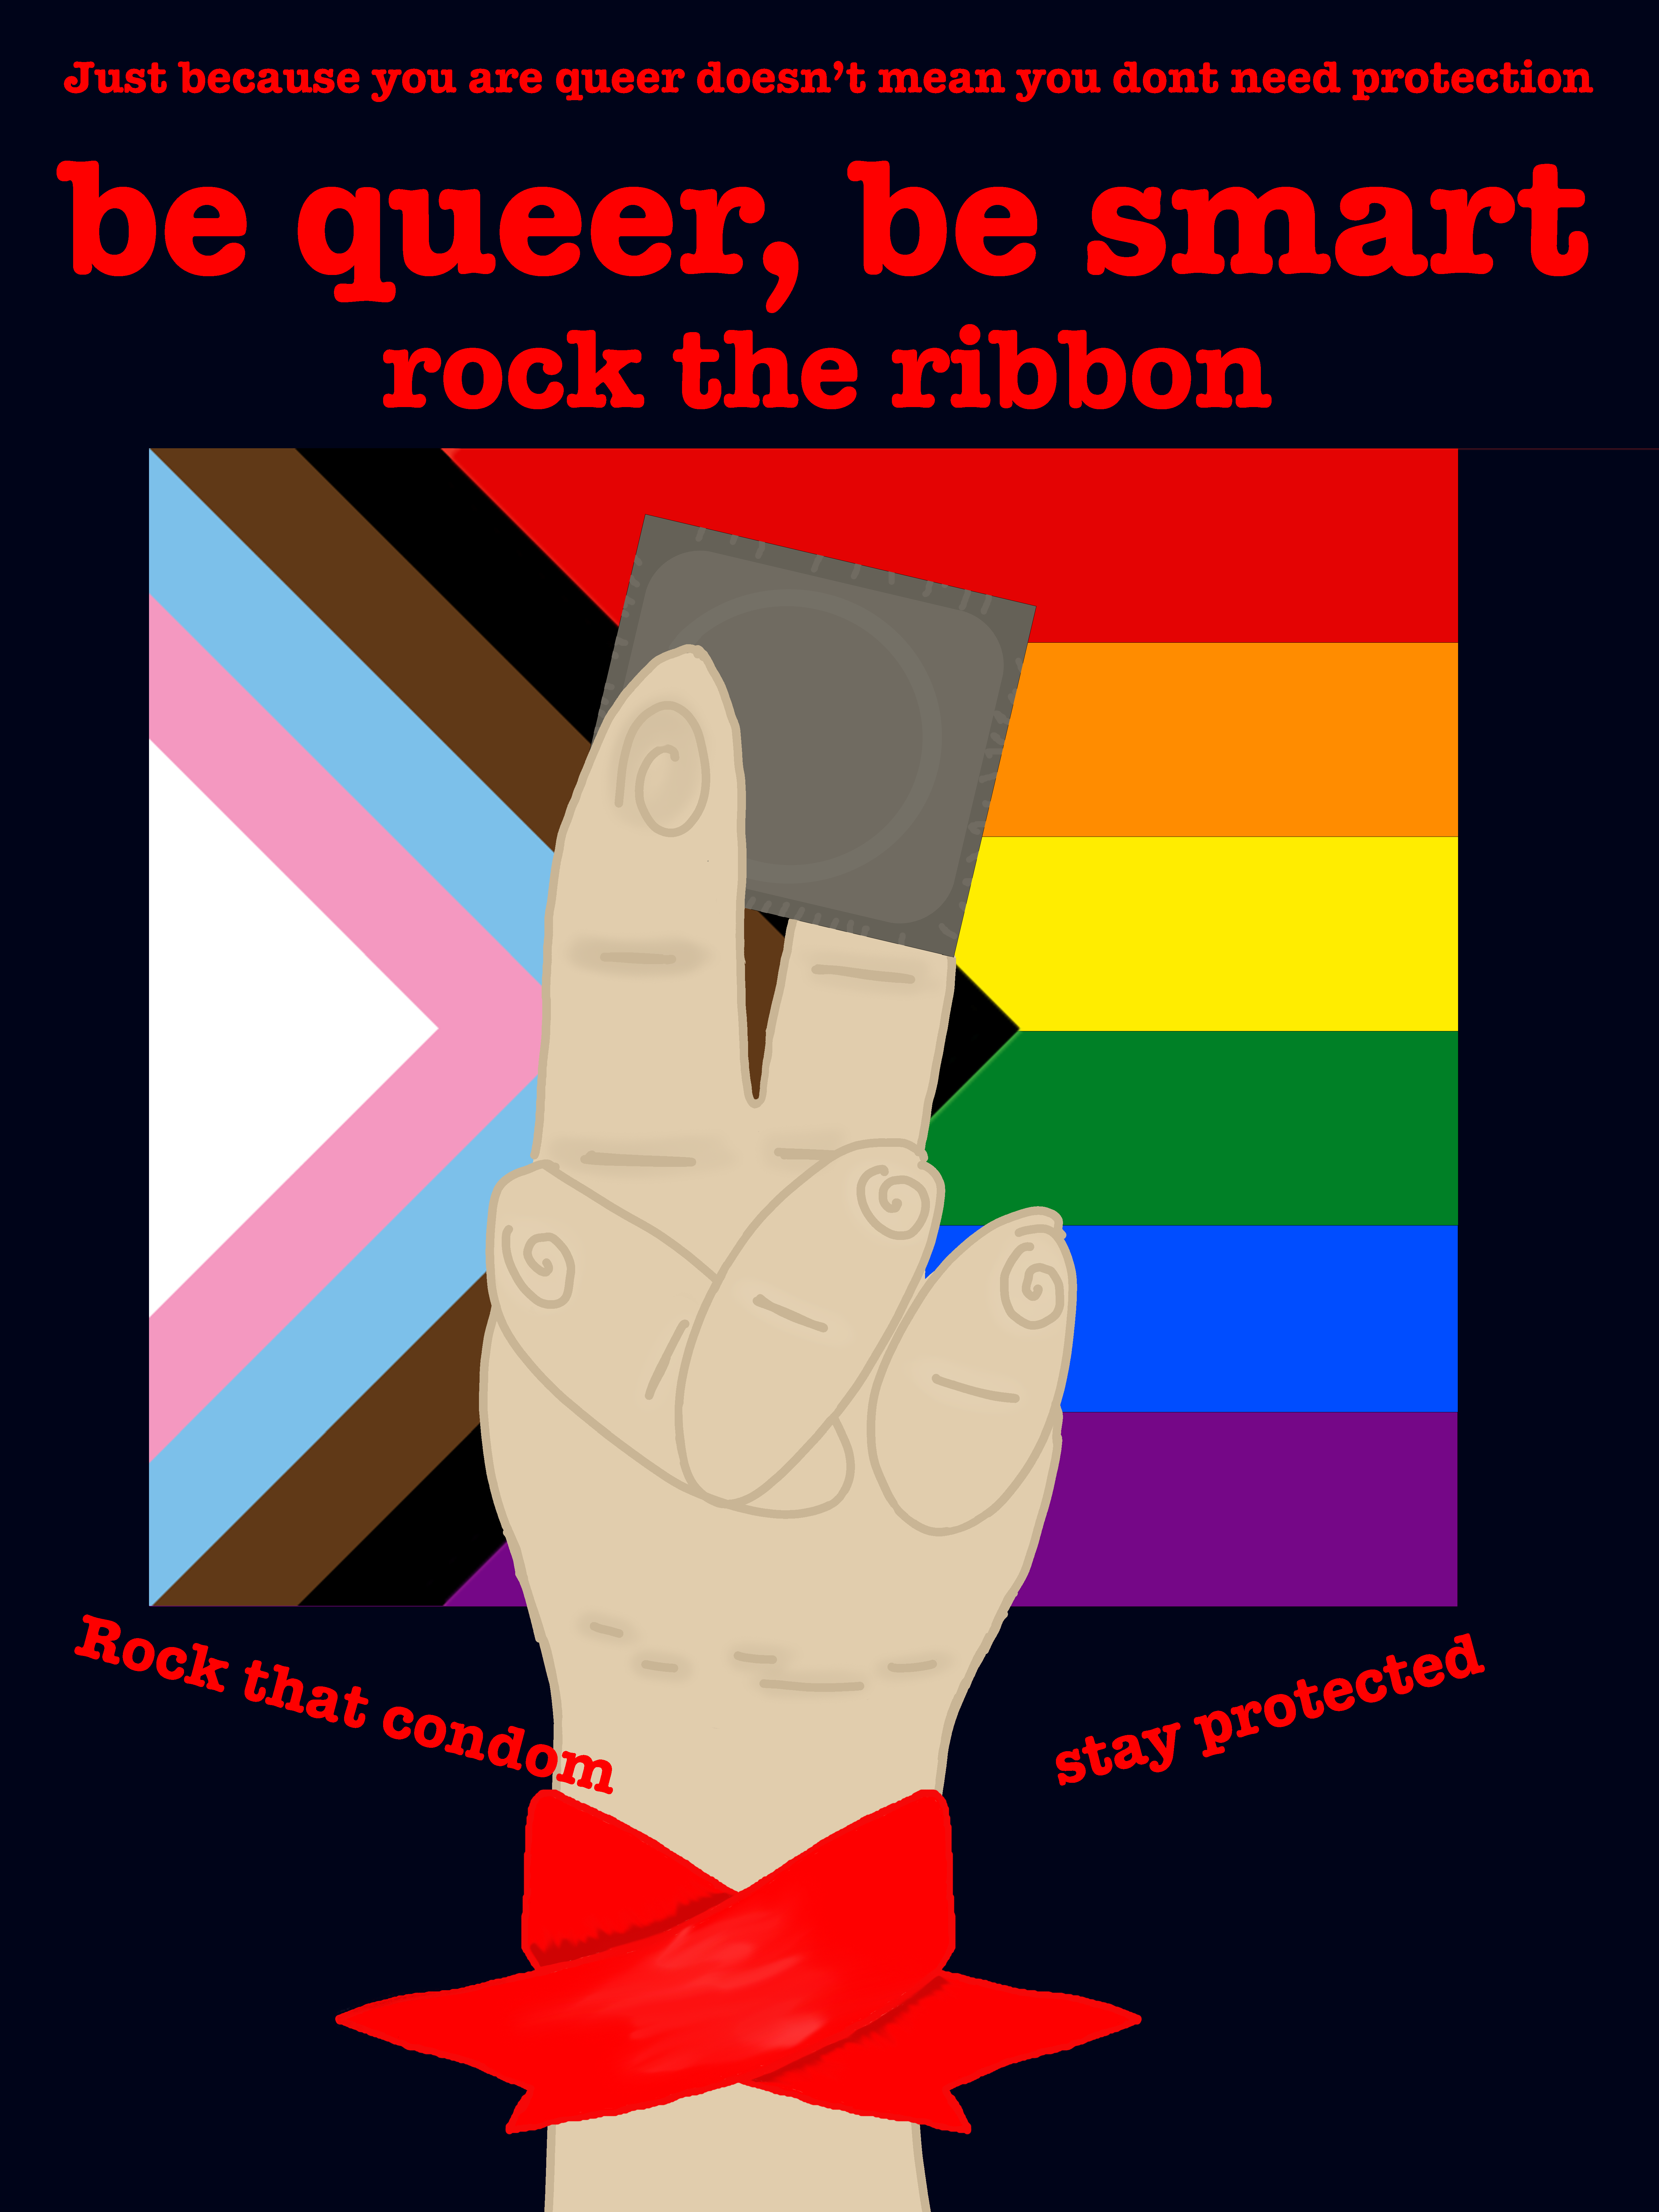 an illustrated hand holding a condom in front of an LGBTQ pride flag. The text reads: be queer, be smart, rock the ribbon